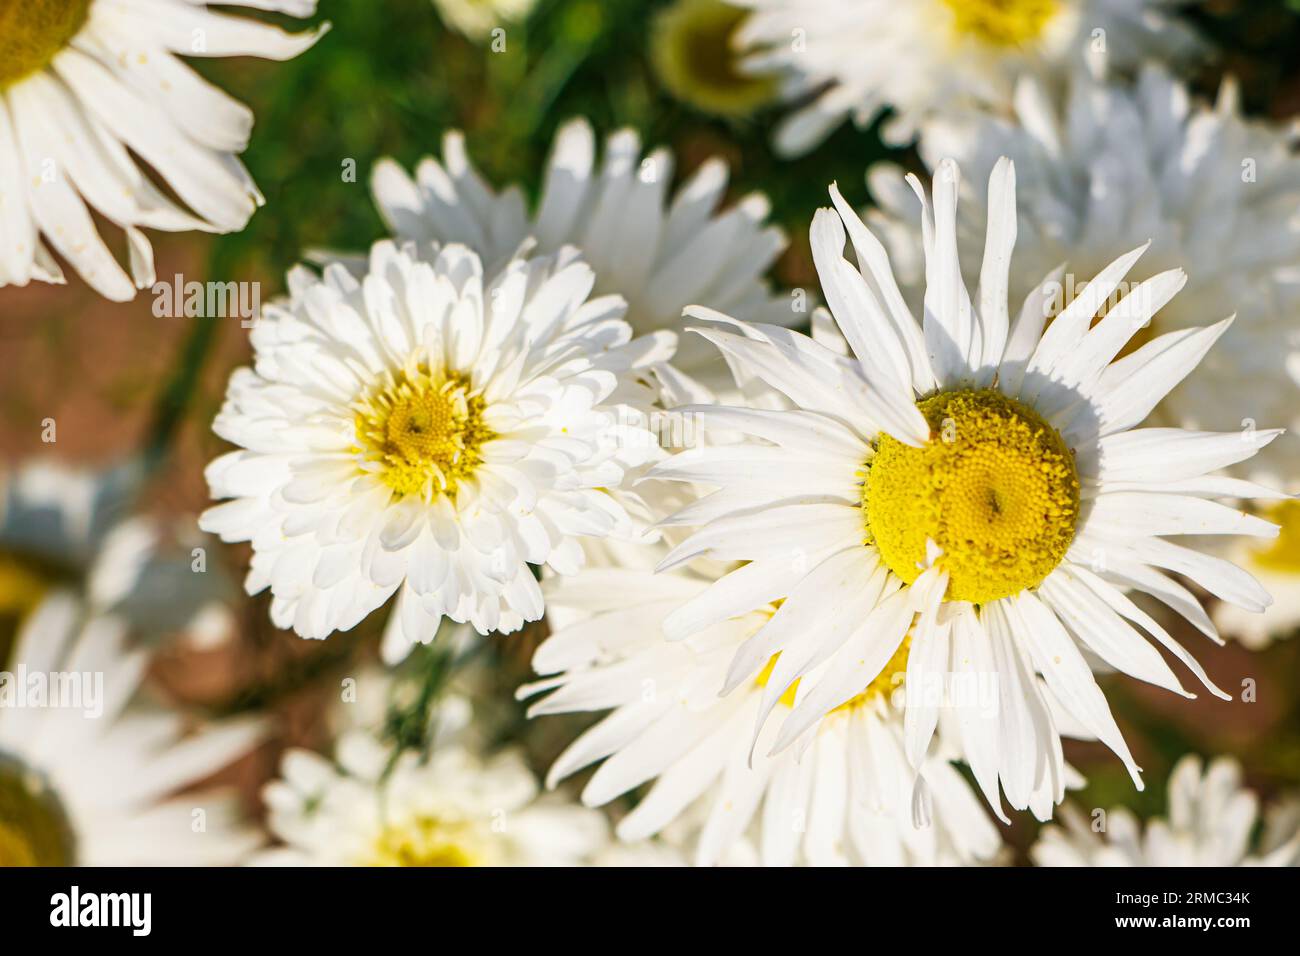 Chamomile flowers close-up. White petals of daisy flower. Summer natural background. Stock Photo